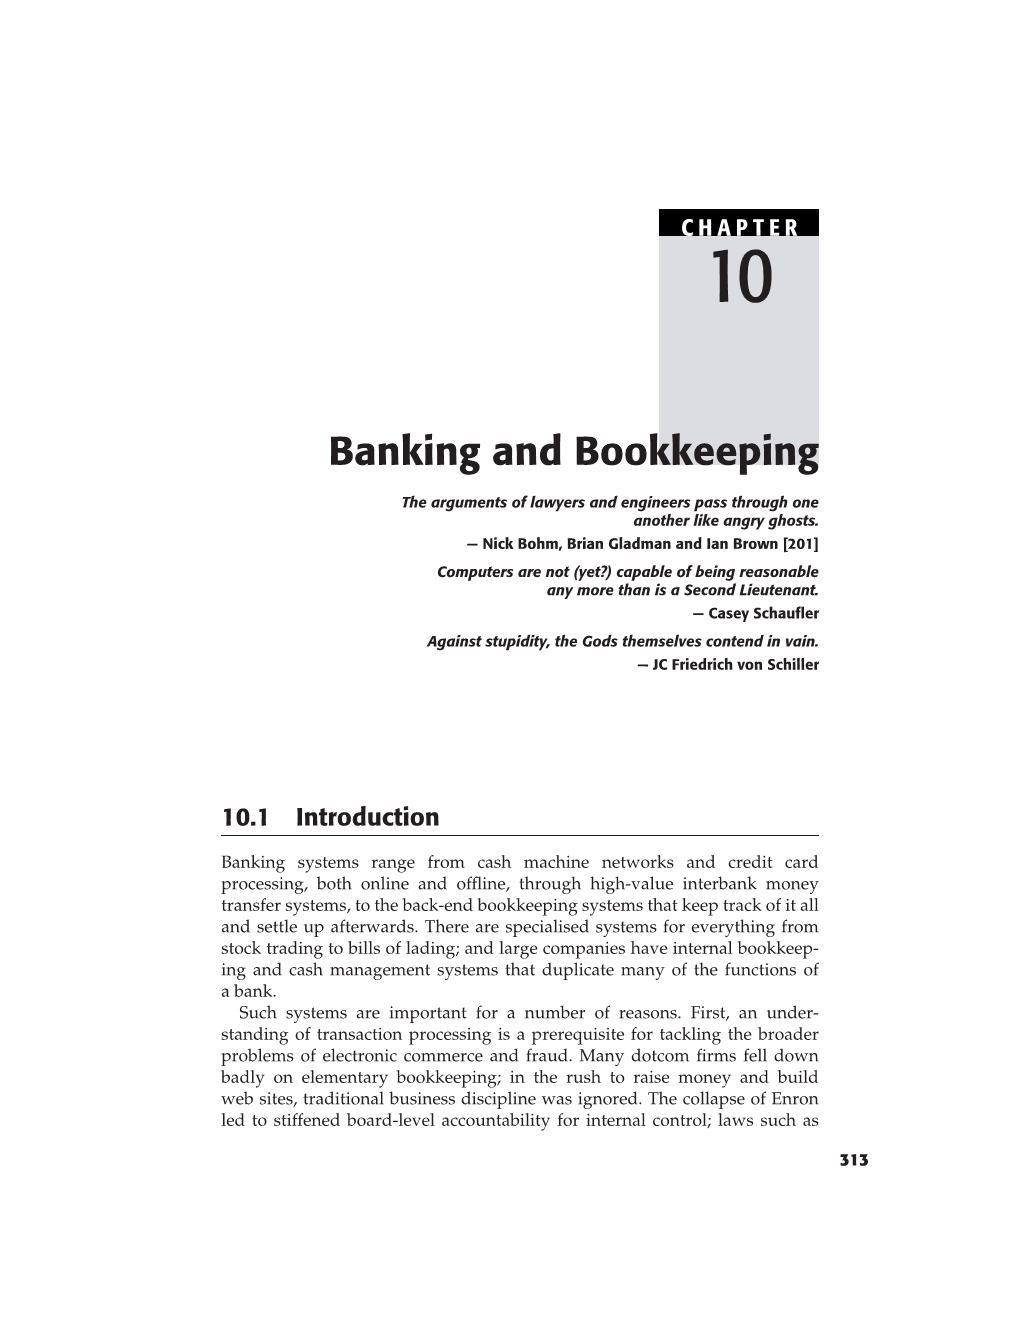 Banking and Bookkeeping